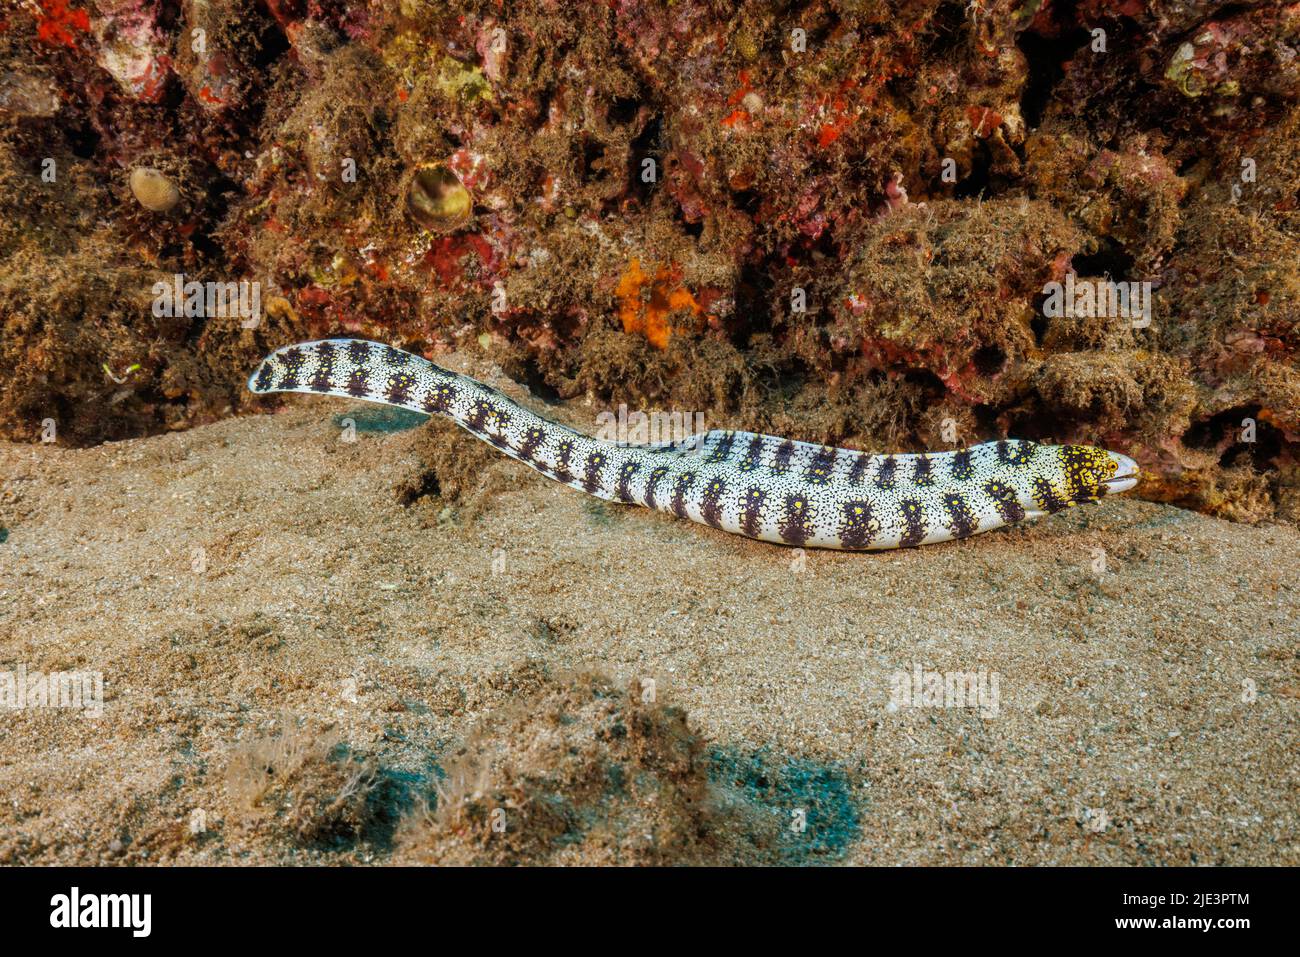 The snowflake moray eel, Echidna nebulosa, reaches 30 inches in length and is seen free swimming during the day more than other morays.  Hawaii. Stock Photo